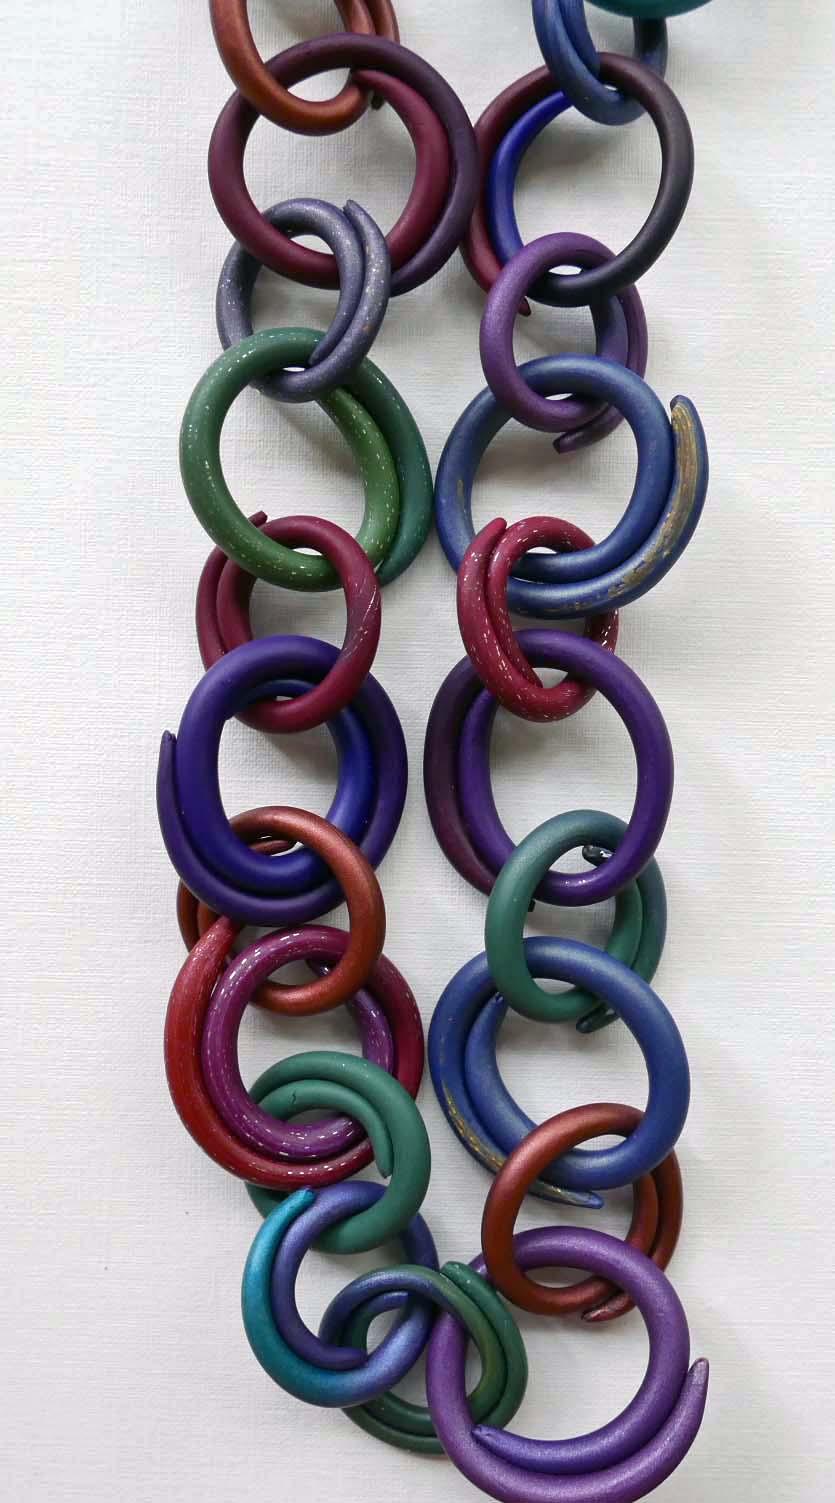 Infinity Necklace - Primary Colors - The Art of Lori Axelrod